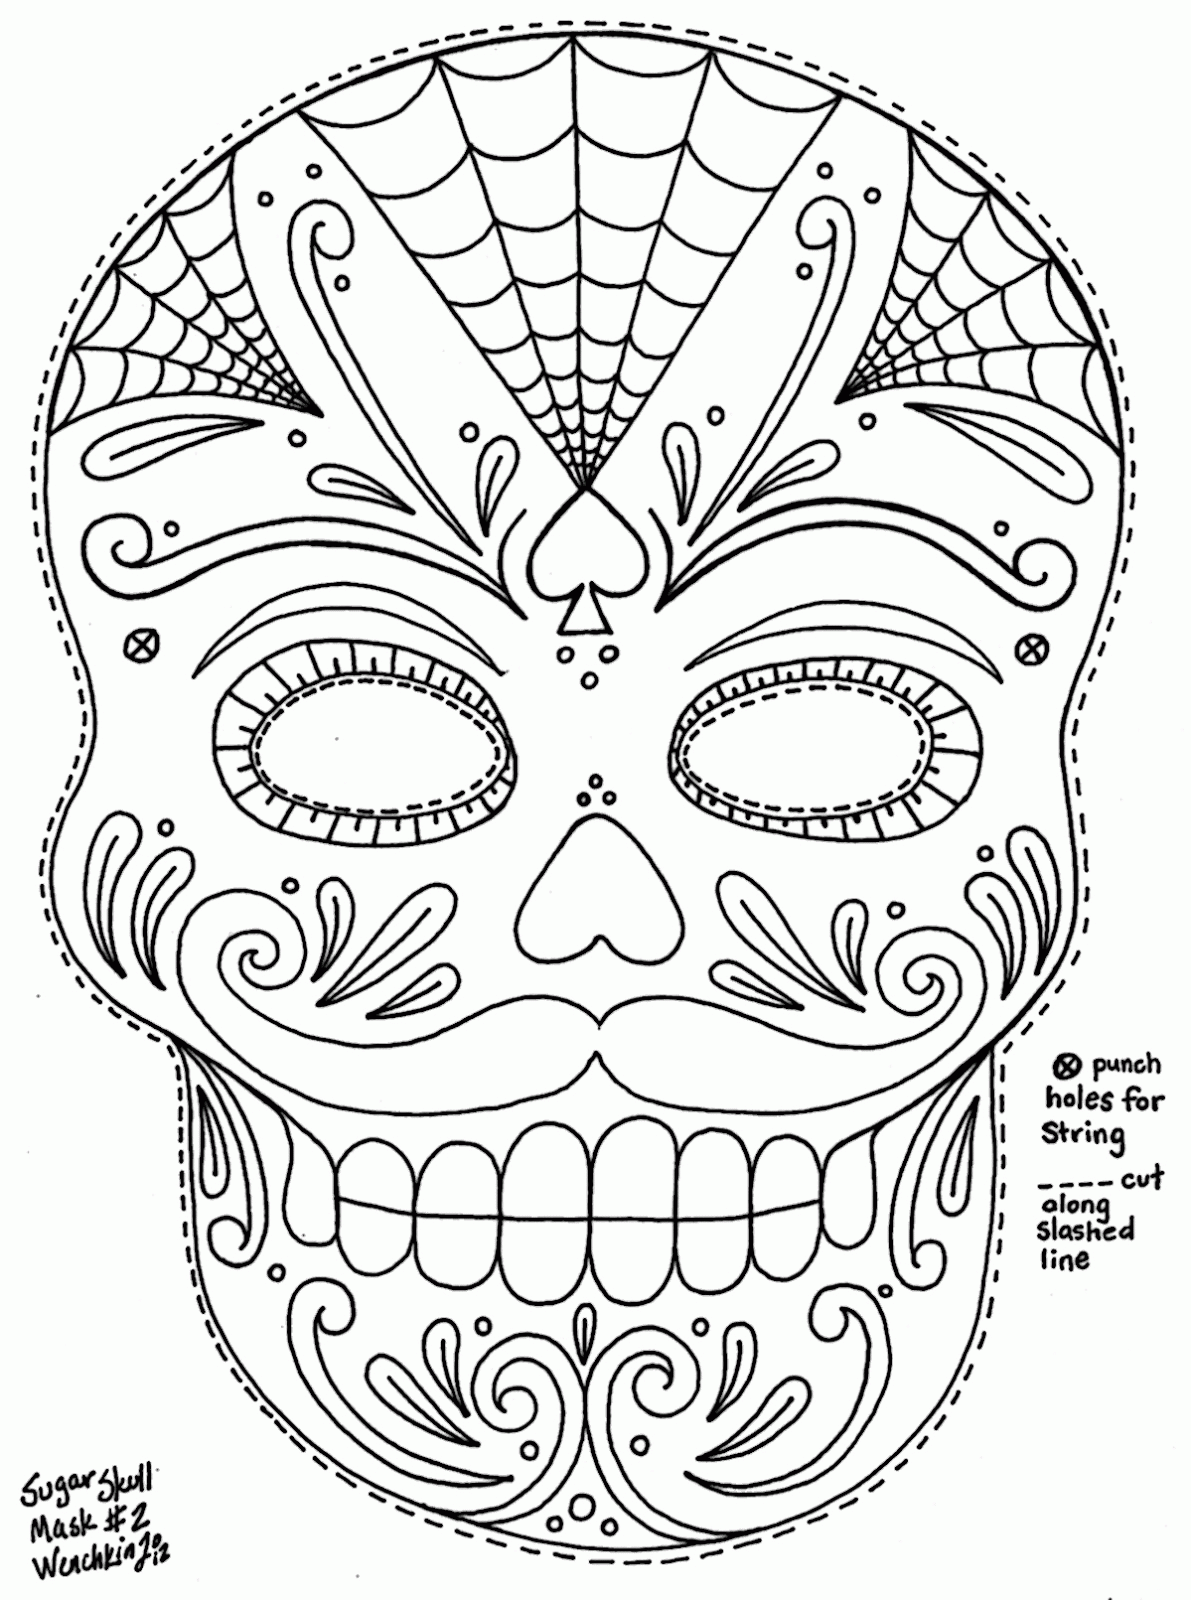 Download Sugar Candy Skulls Coloring Pages - Coloring Home